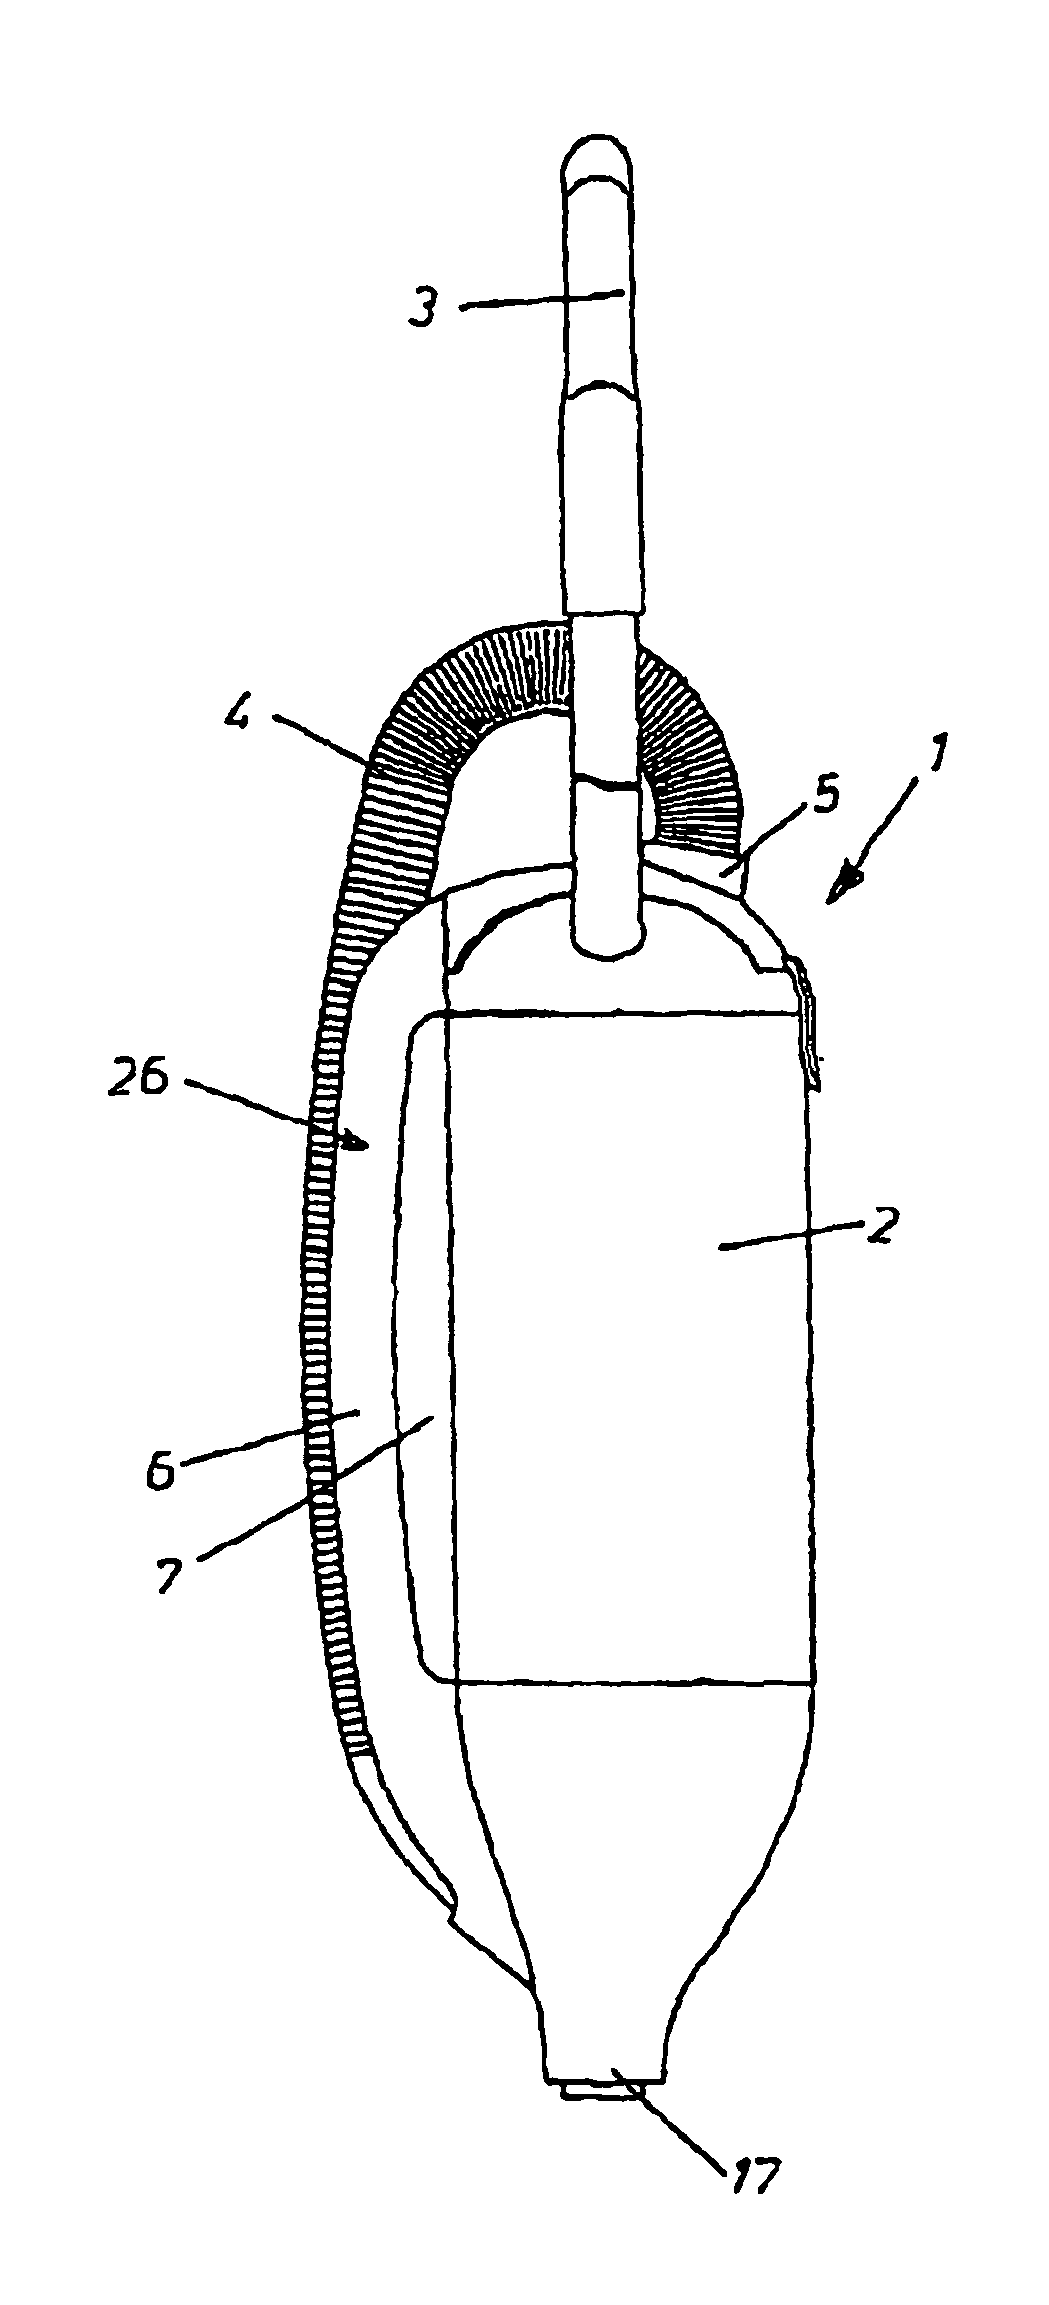 Method for cleaning dirt and debris from surfaces